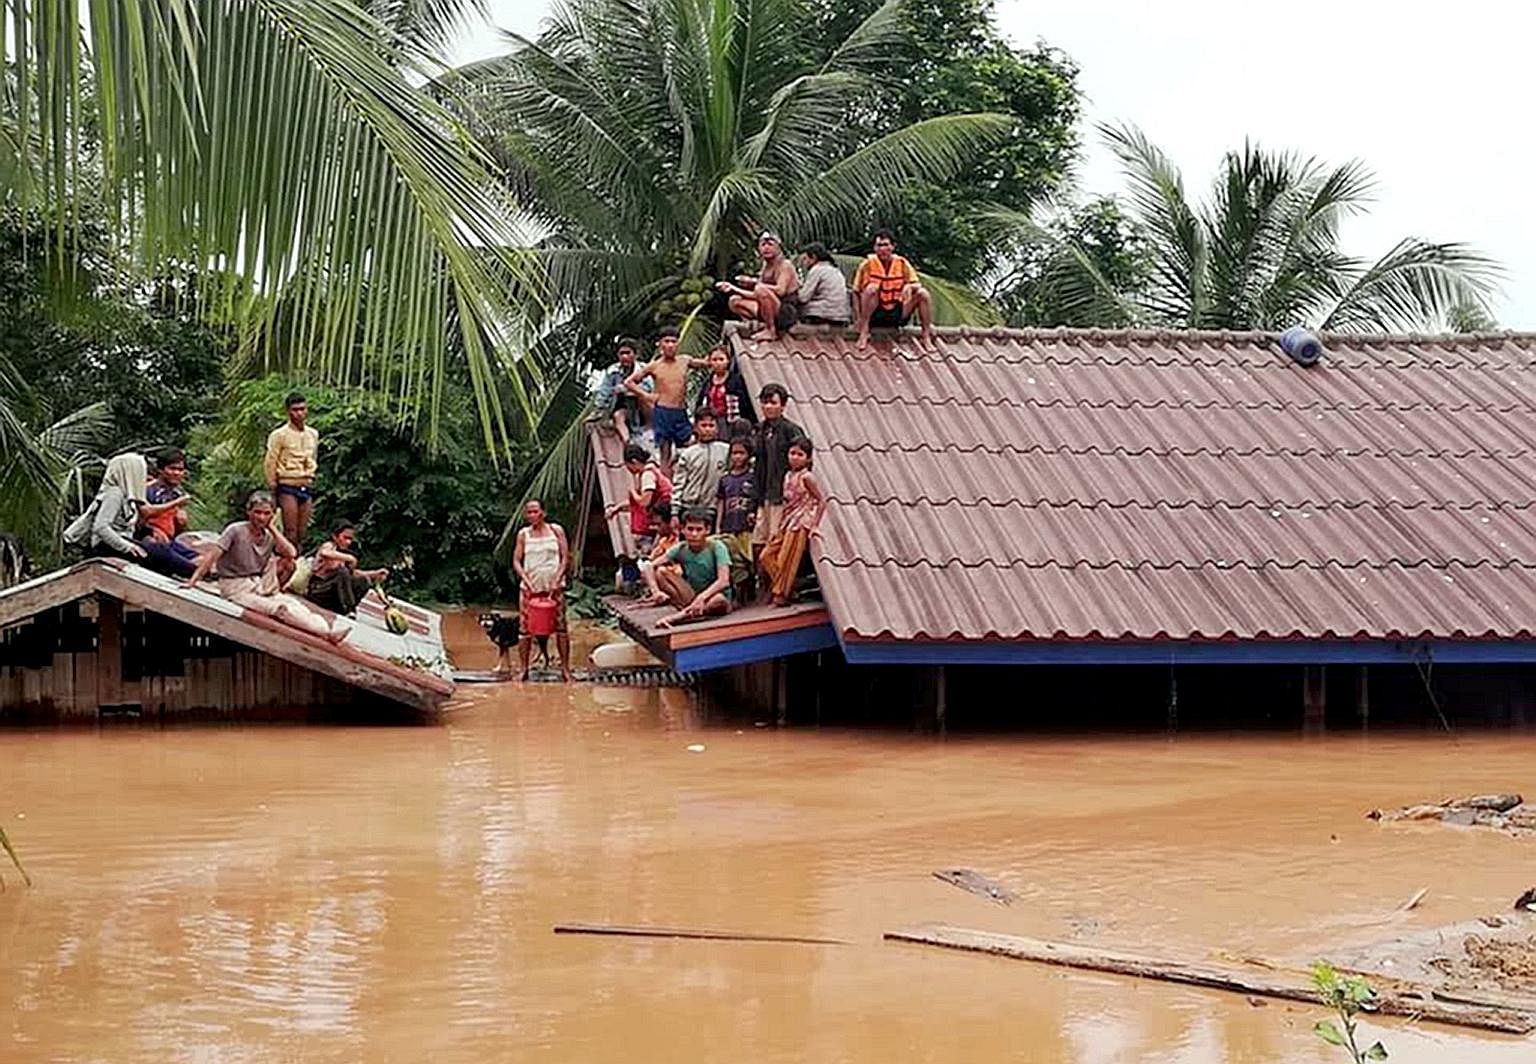 A billion-dollar hydropower dam that was under construction in Laos collapsed on Monday and unleashed 5 billion cubic m of water - enough to fill more than two million Olympic-sized swimming pools - killing several people, with hundreds of others rep